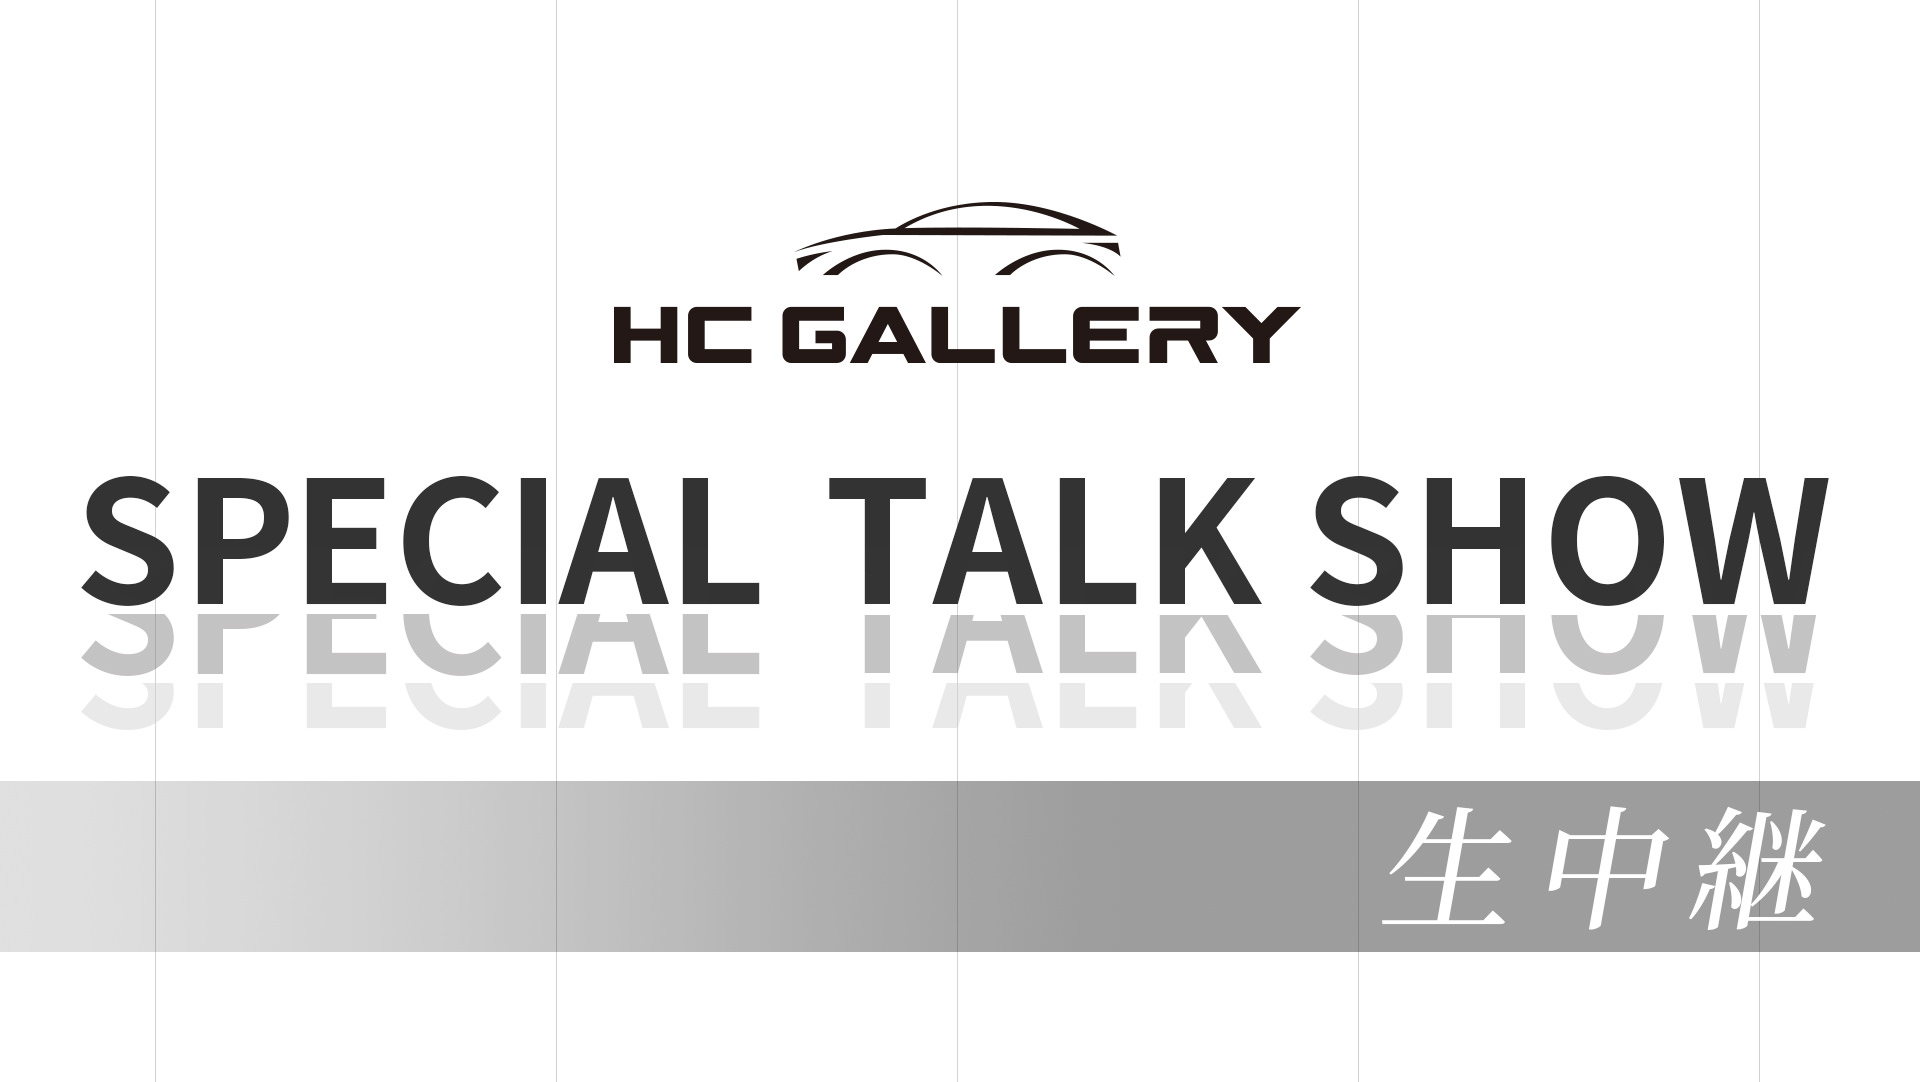 HC GALLERY SPECIAL TALK SHOW